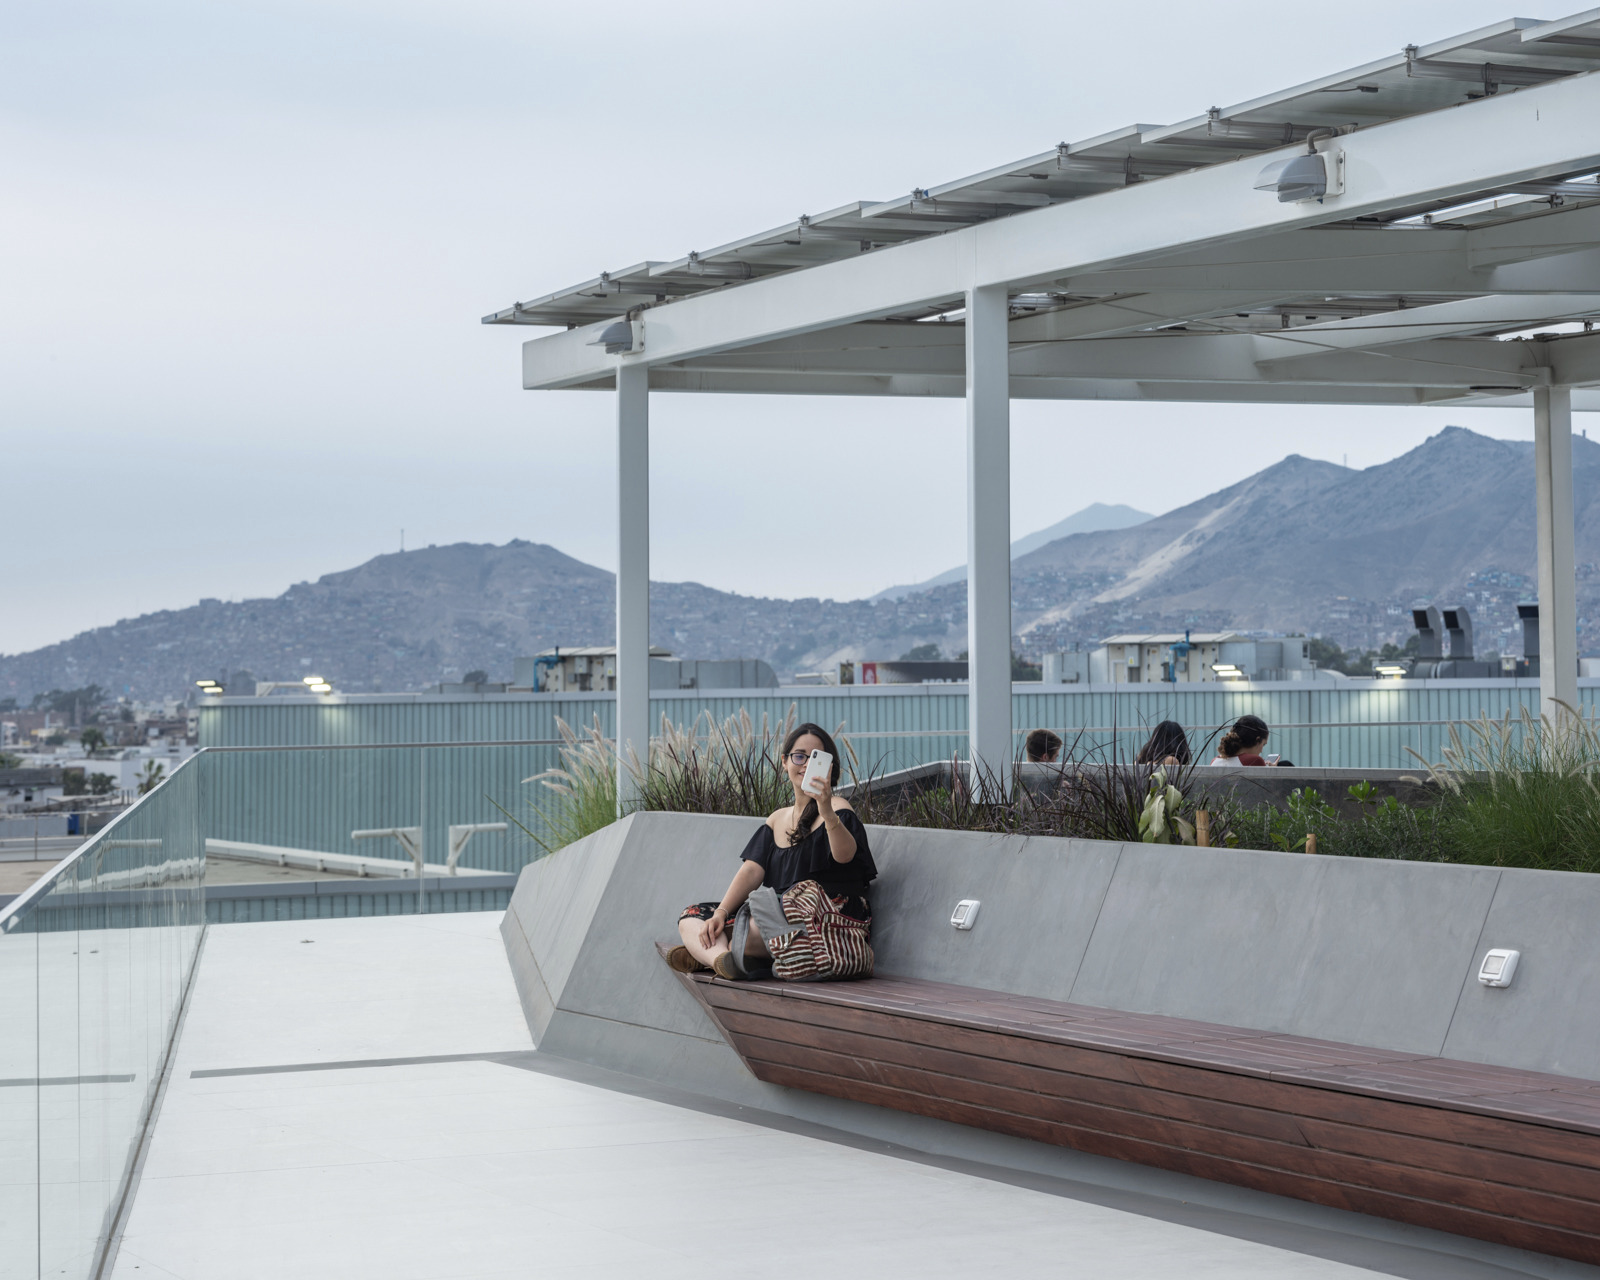 woman taking selfie on bench located on rooftop terrace